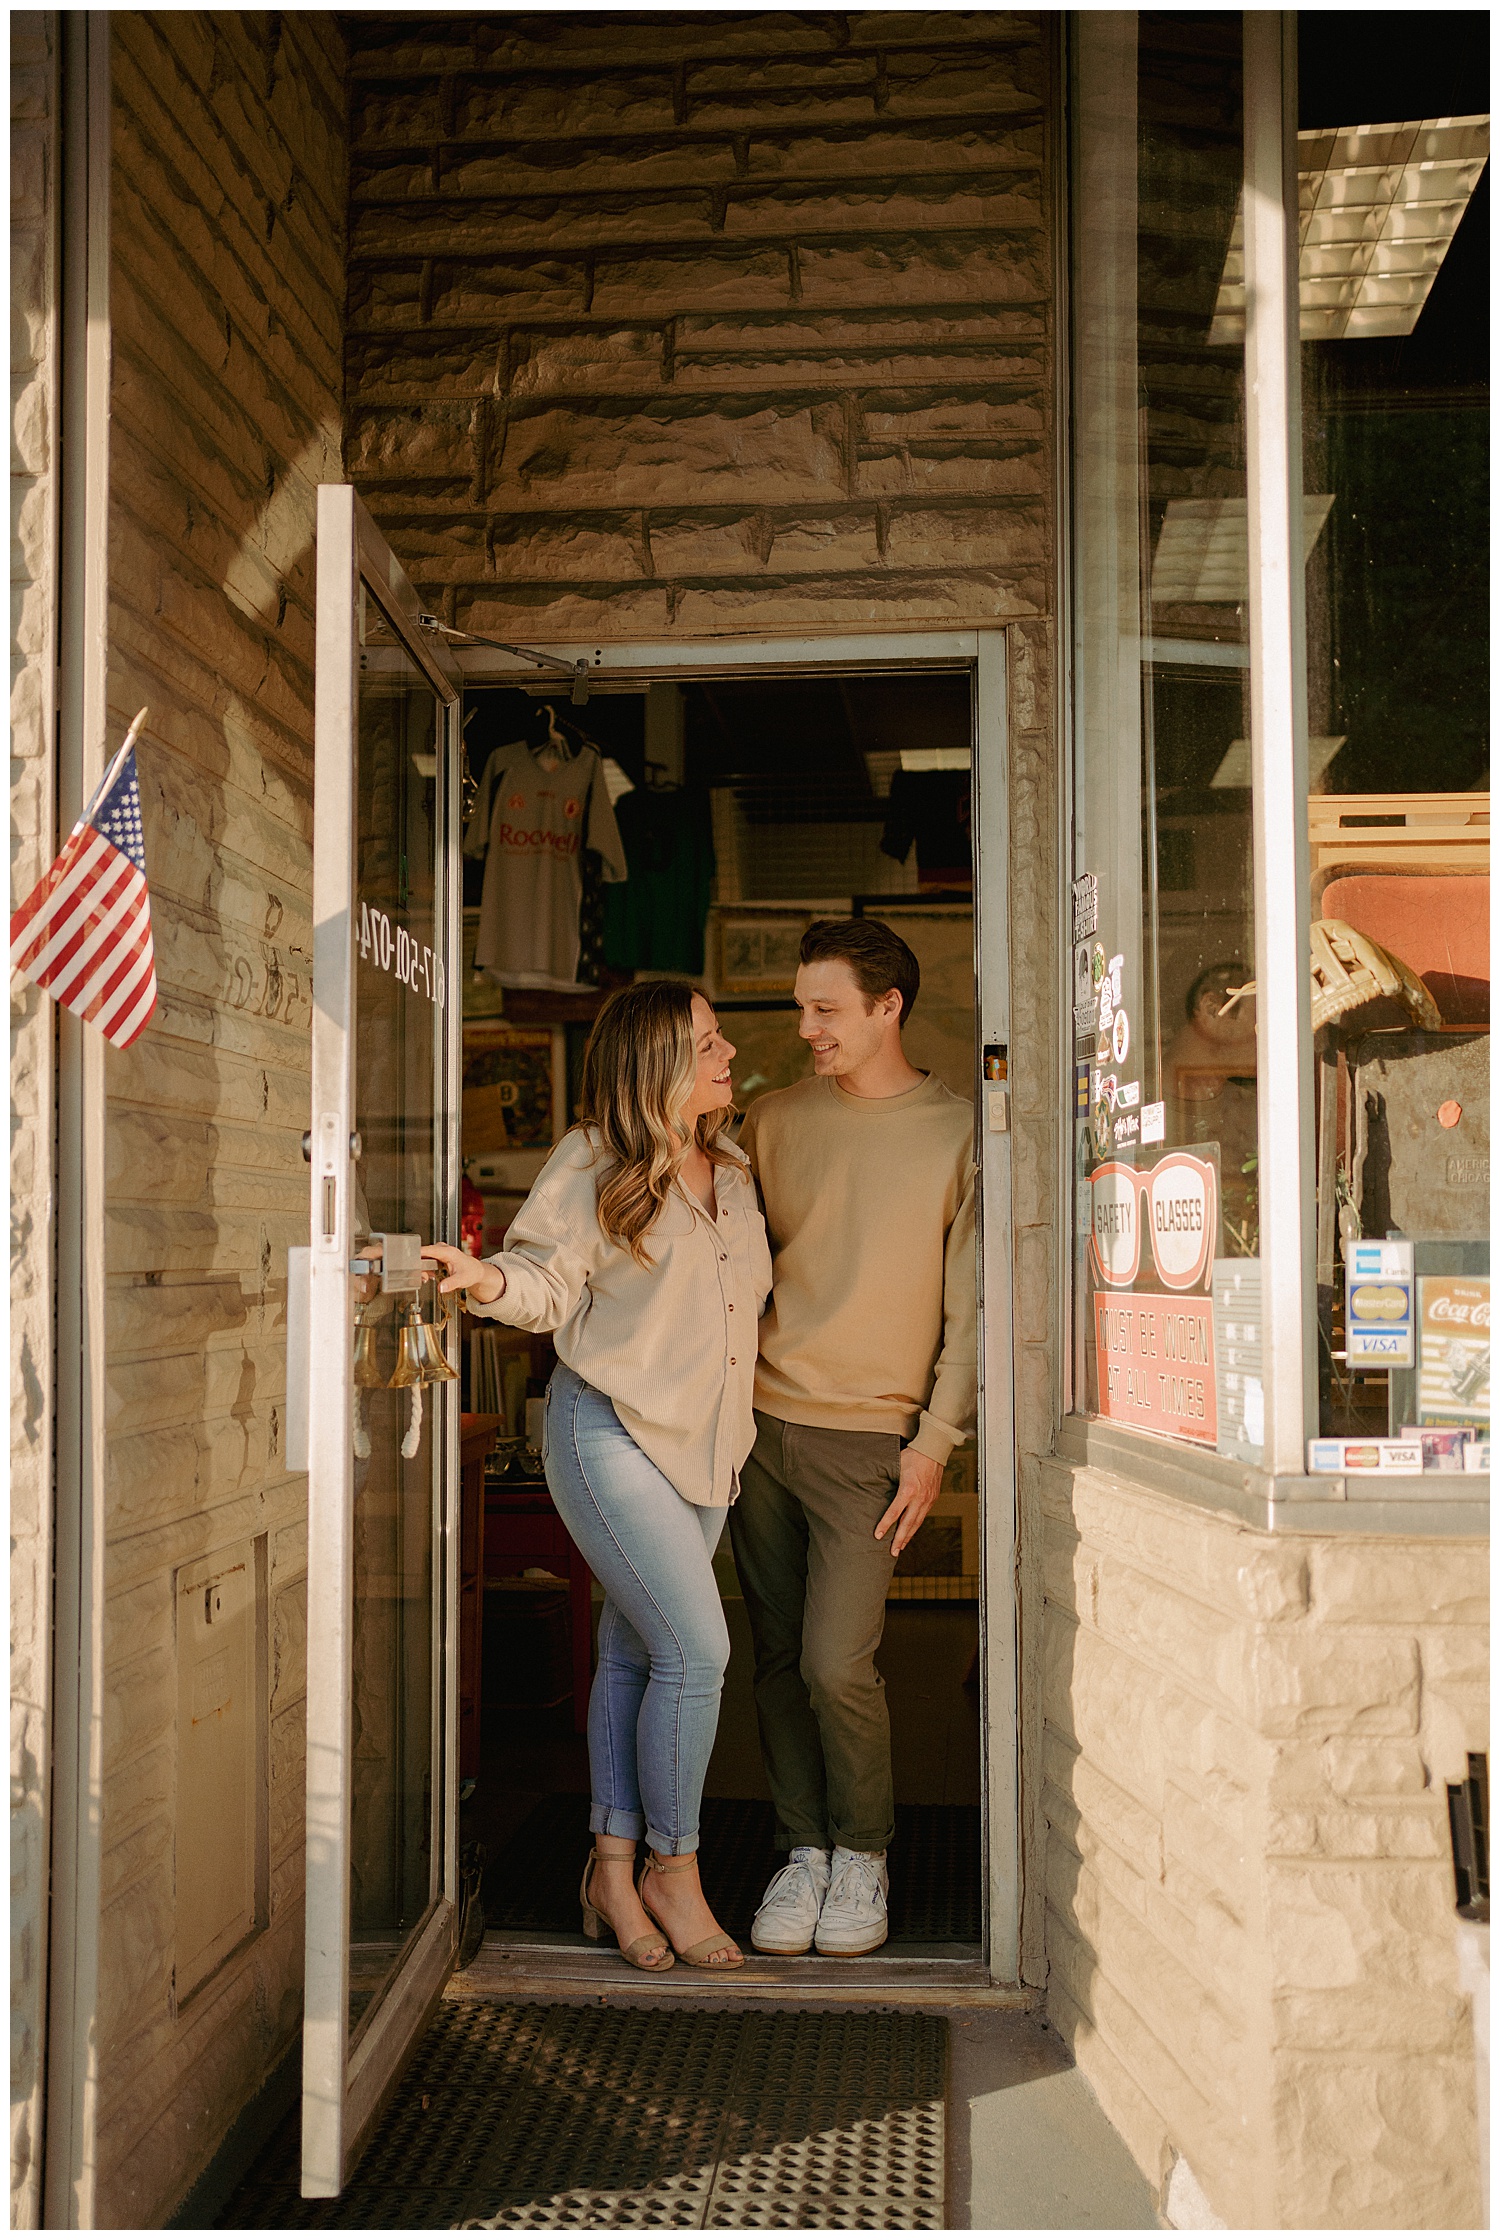 Couple standing in antique store entrance